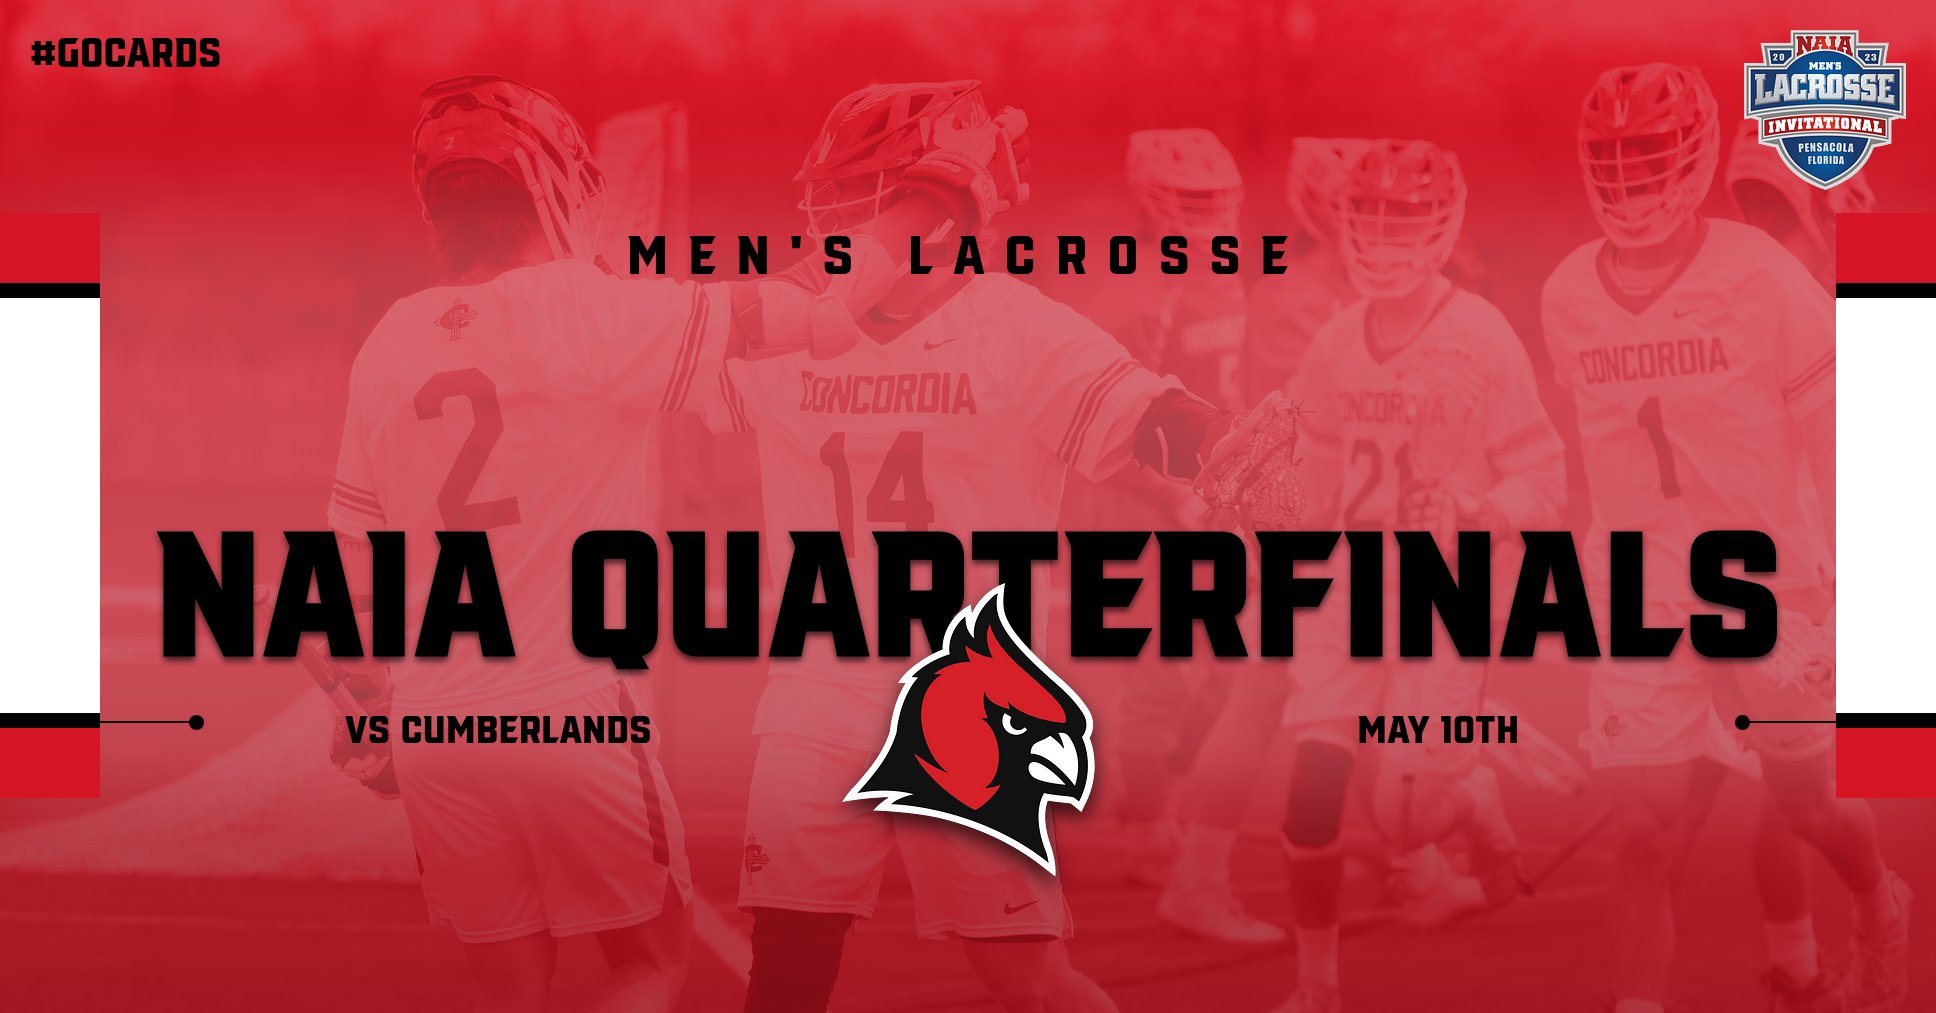 NAIA INVITATIONAL PREVIEW: Men's Lacrosse opens tournament with rematch against #3 Cumberlands